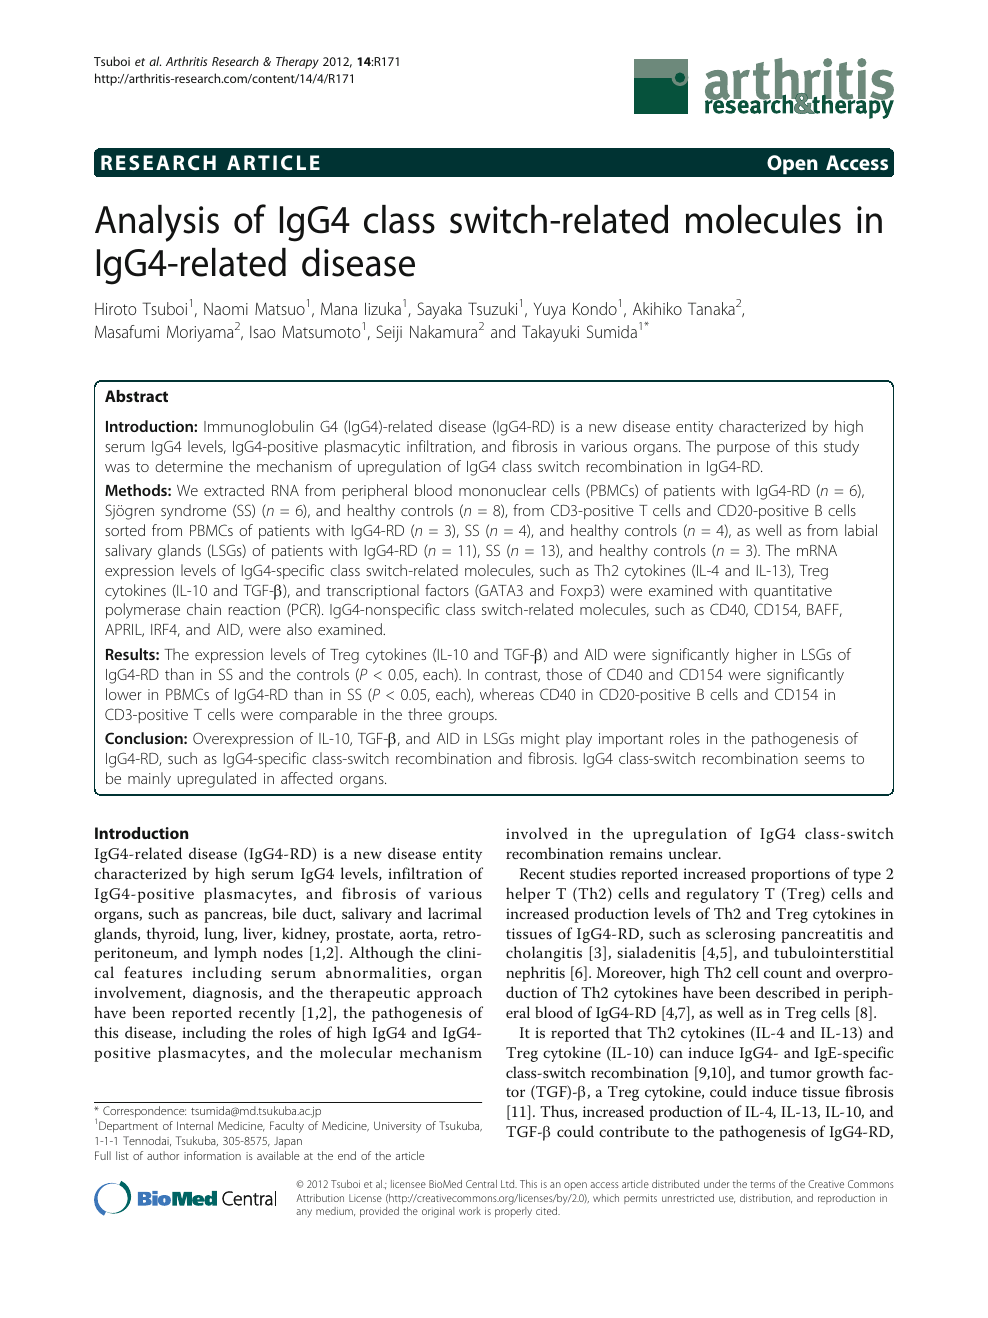 Analysis Of Igg4 Class Switch Related Molecules In Igg4 Related Disease Topic Of Research Paper In Clinical Medicine Download Scholarly Article Pdf And Read For Free On Cyberleninka Open Science Hub